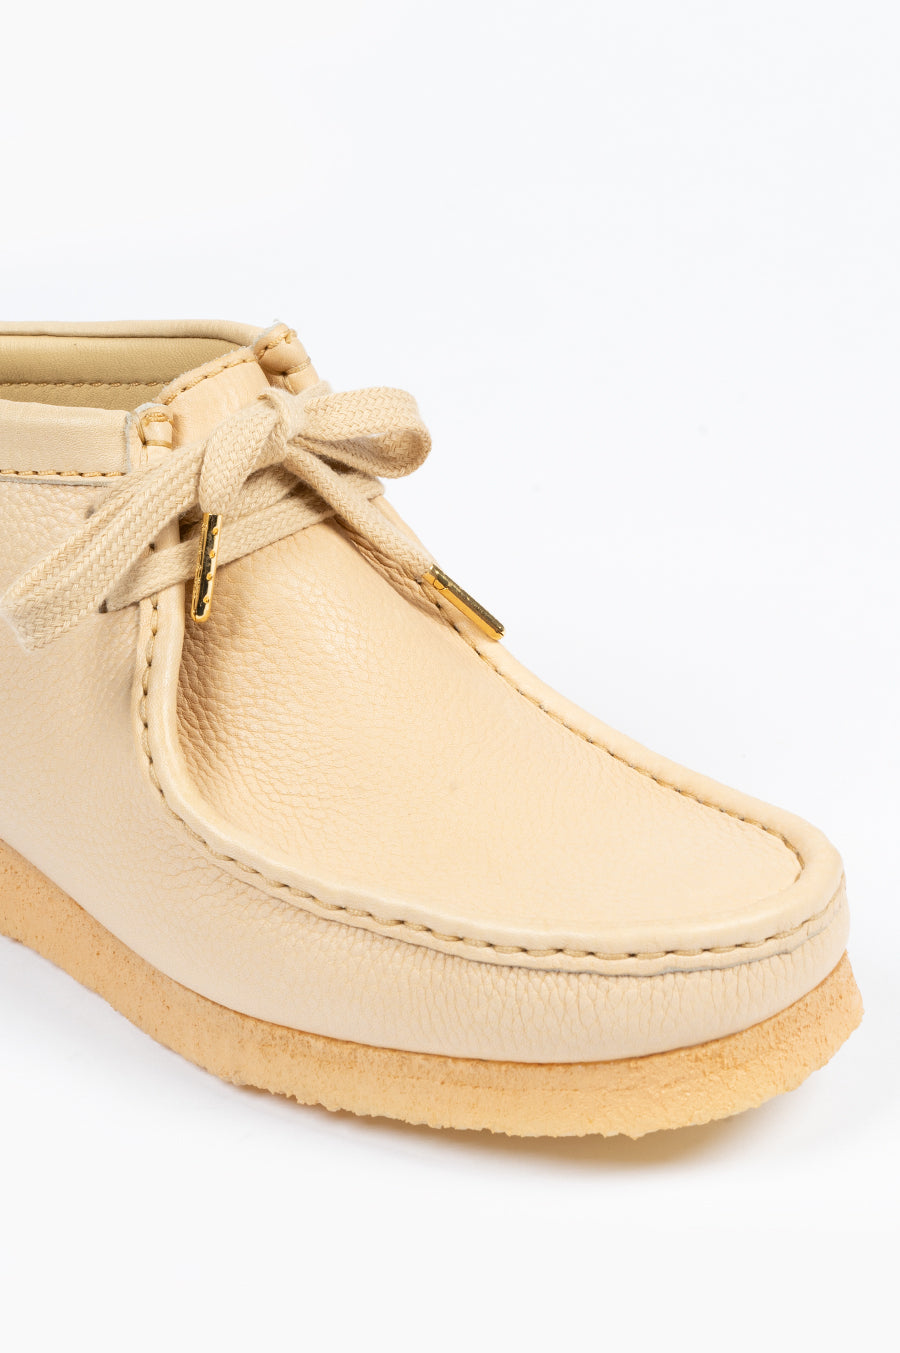 CLARKS X SPORTY & RICH WALLABEE BOOT CREAM PUFF LEATHER